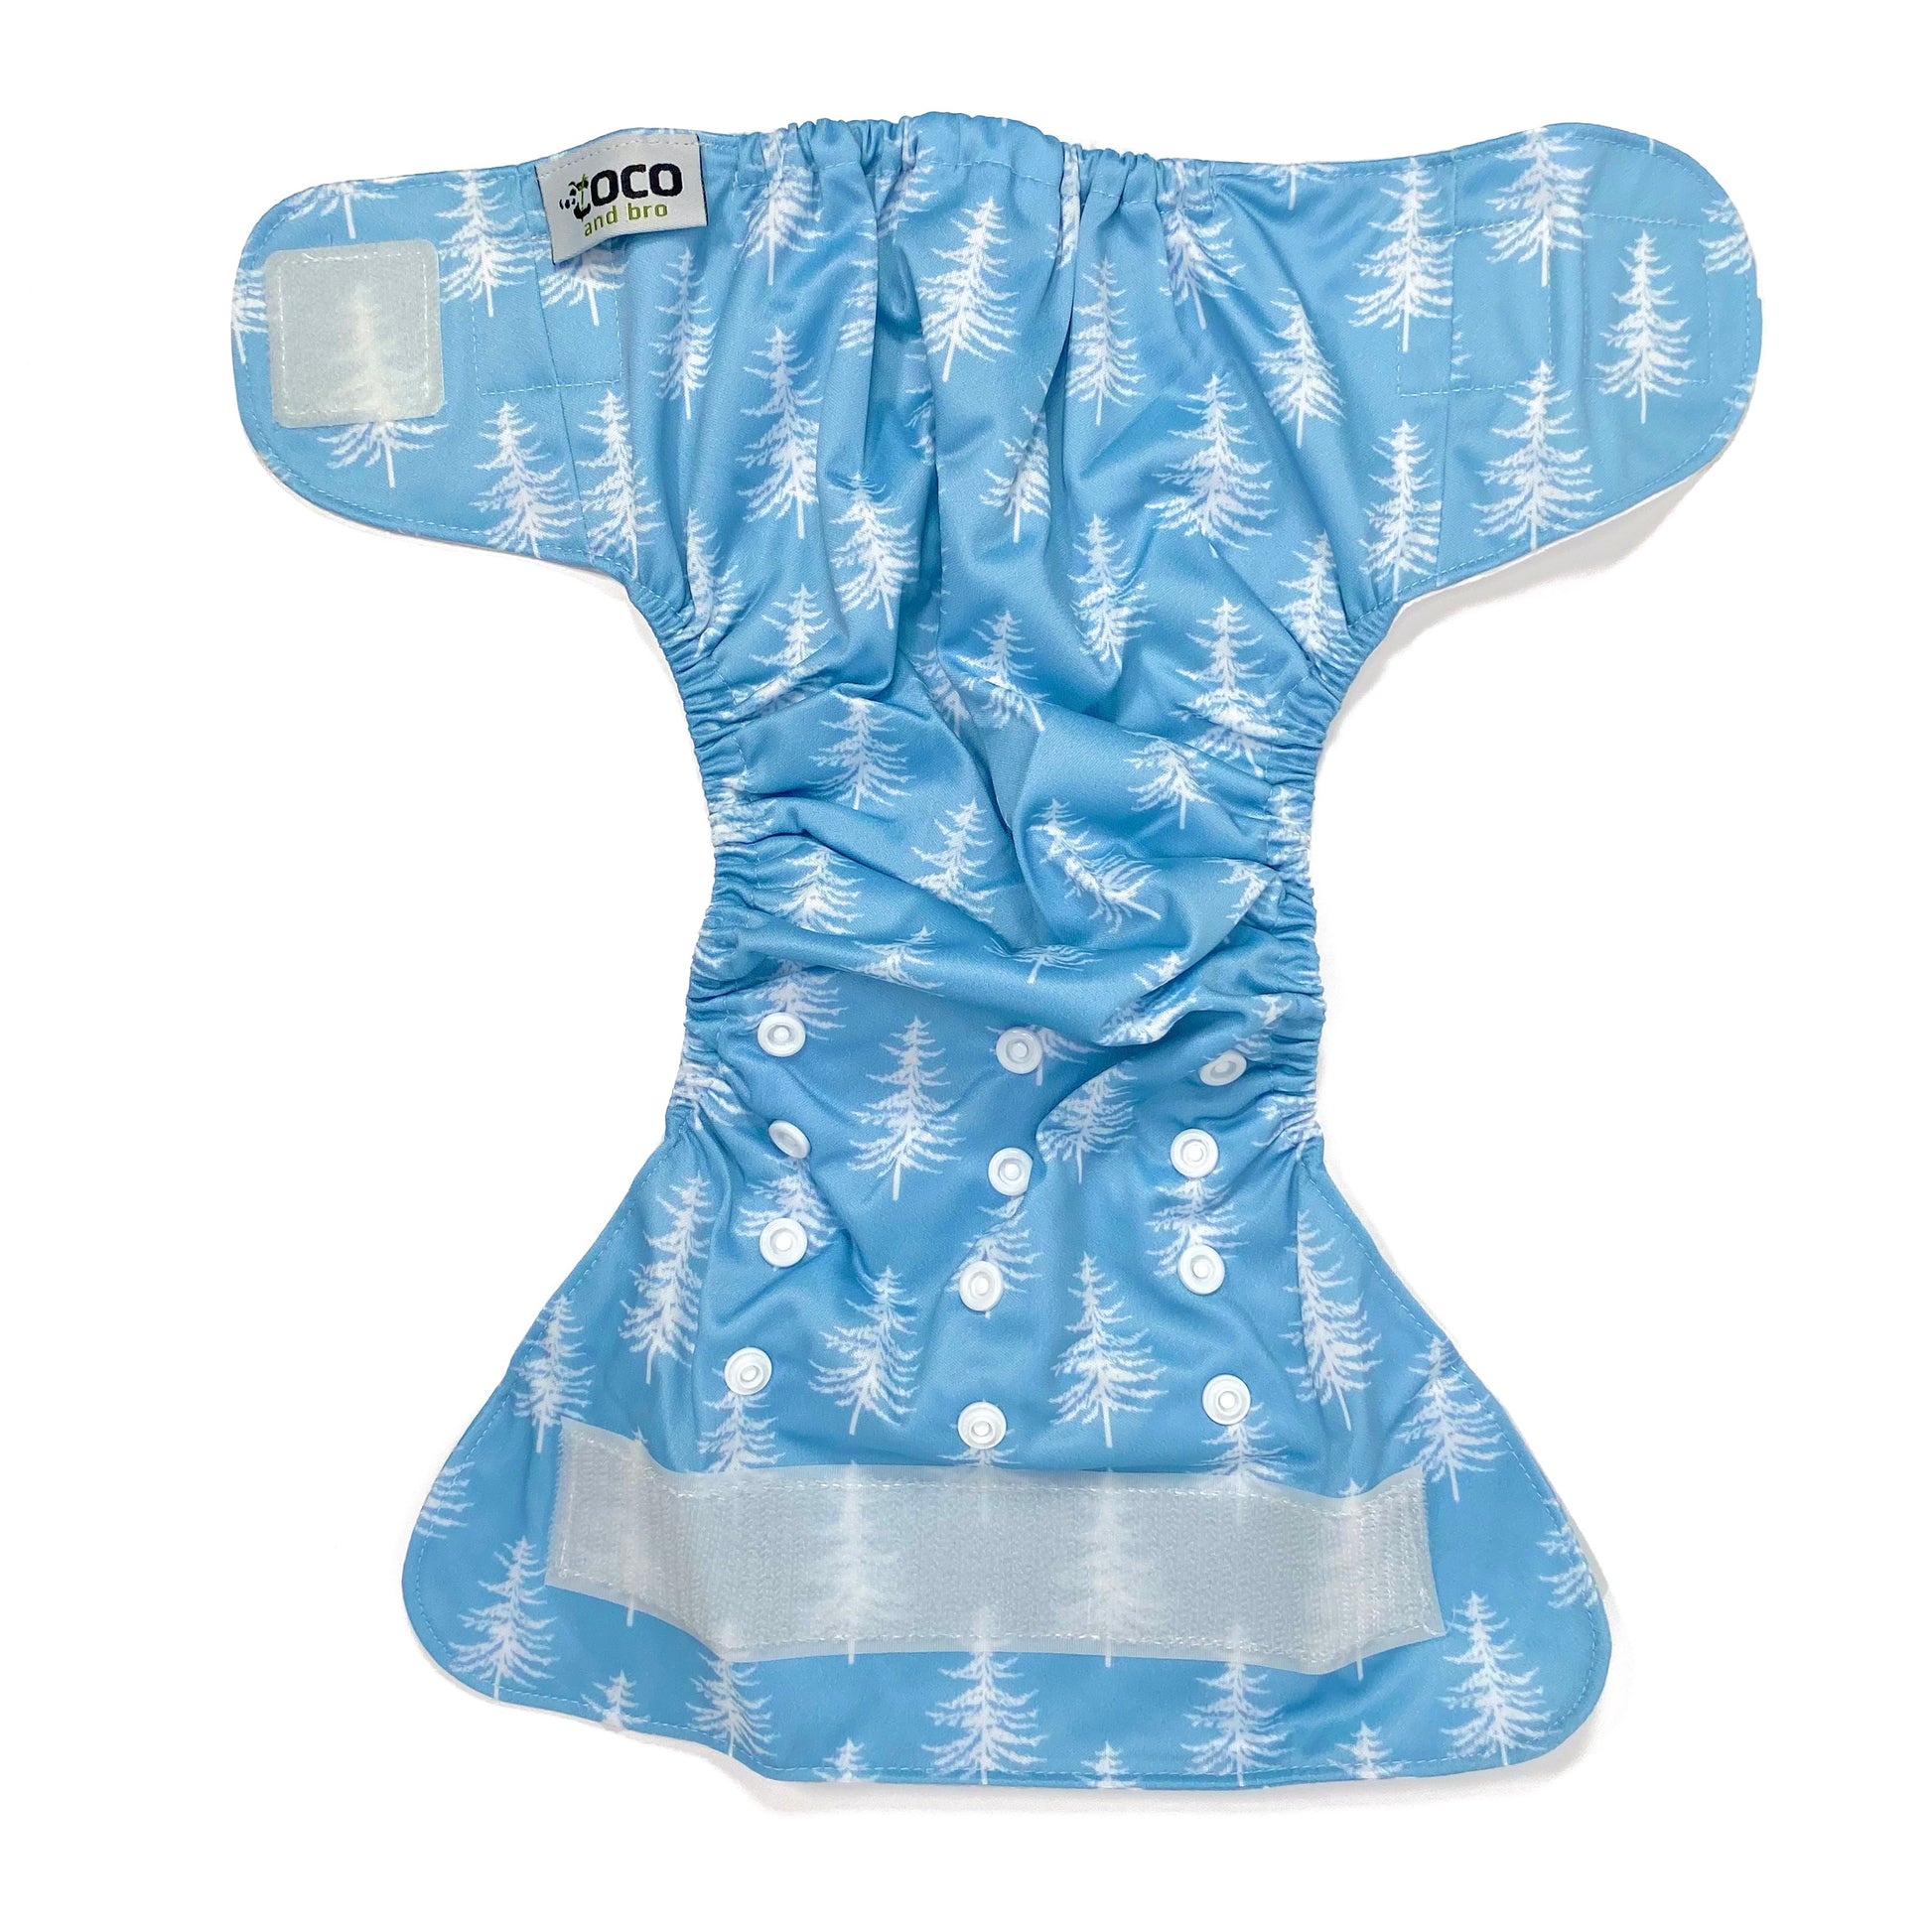 An adjustable reusable nappy for babies and toddlers, featuring a cool blue pine design design, with images of white pine trees on a blue background. View shows the full outside pattern of the nappy, with fastenings open.